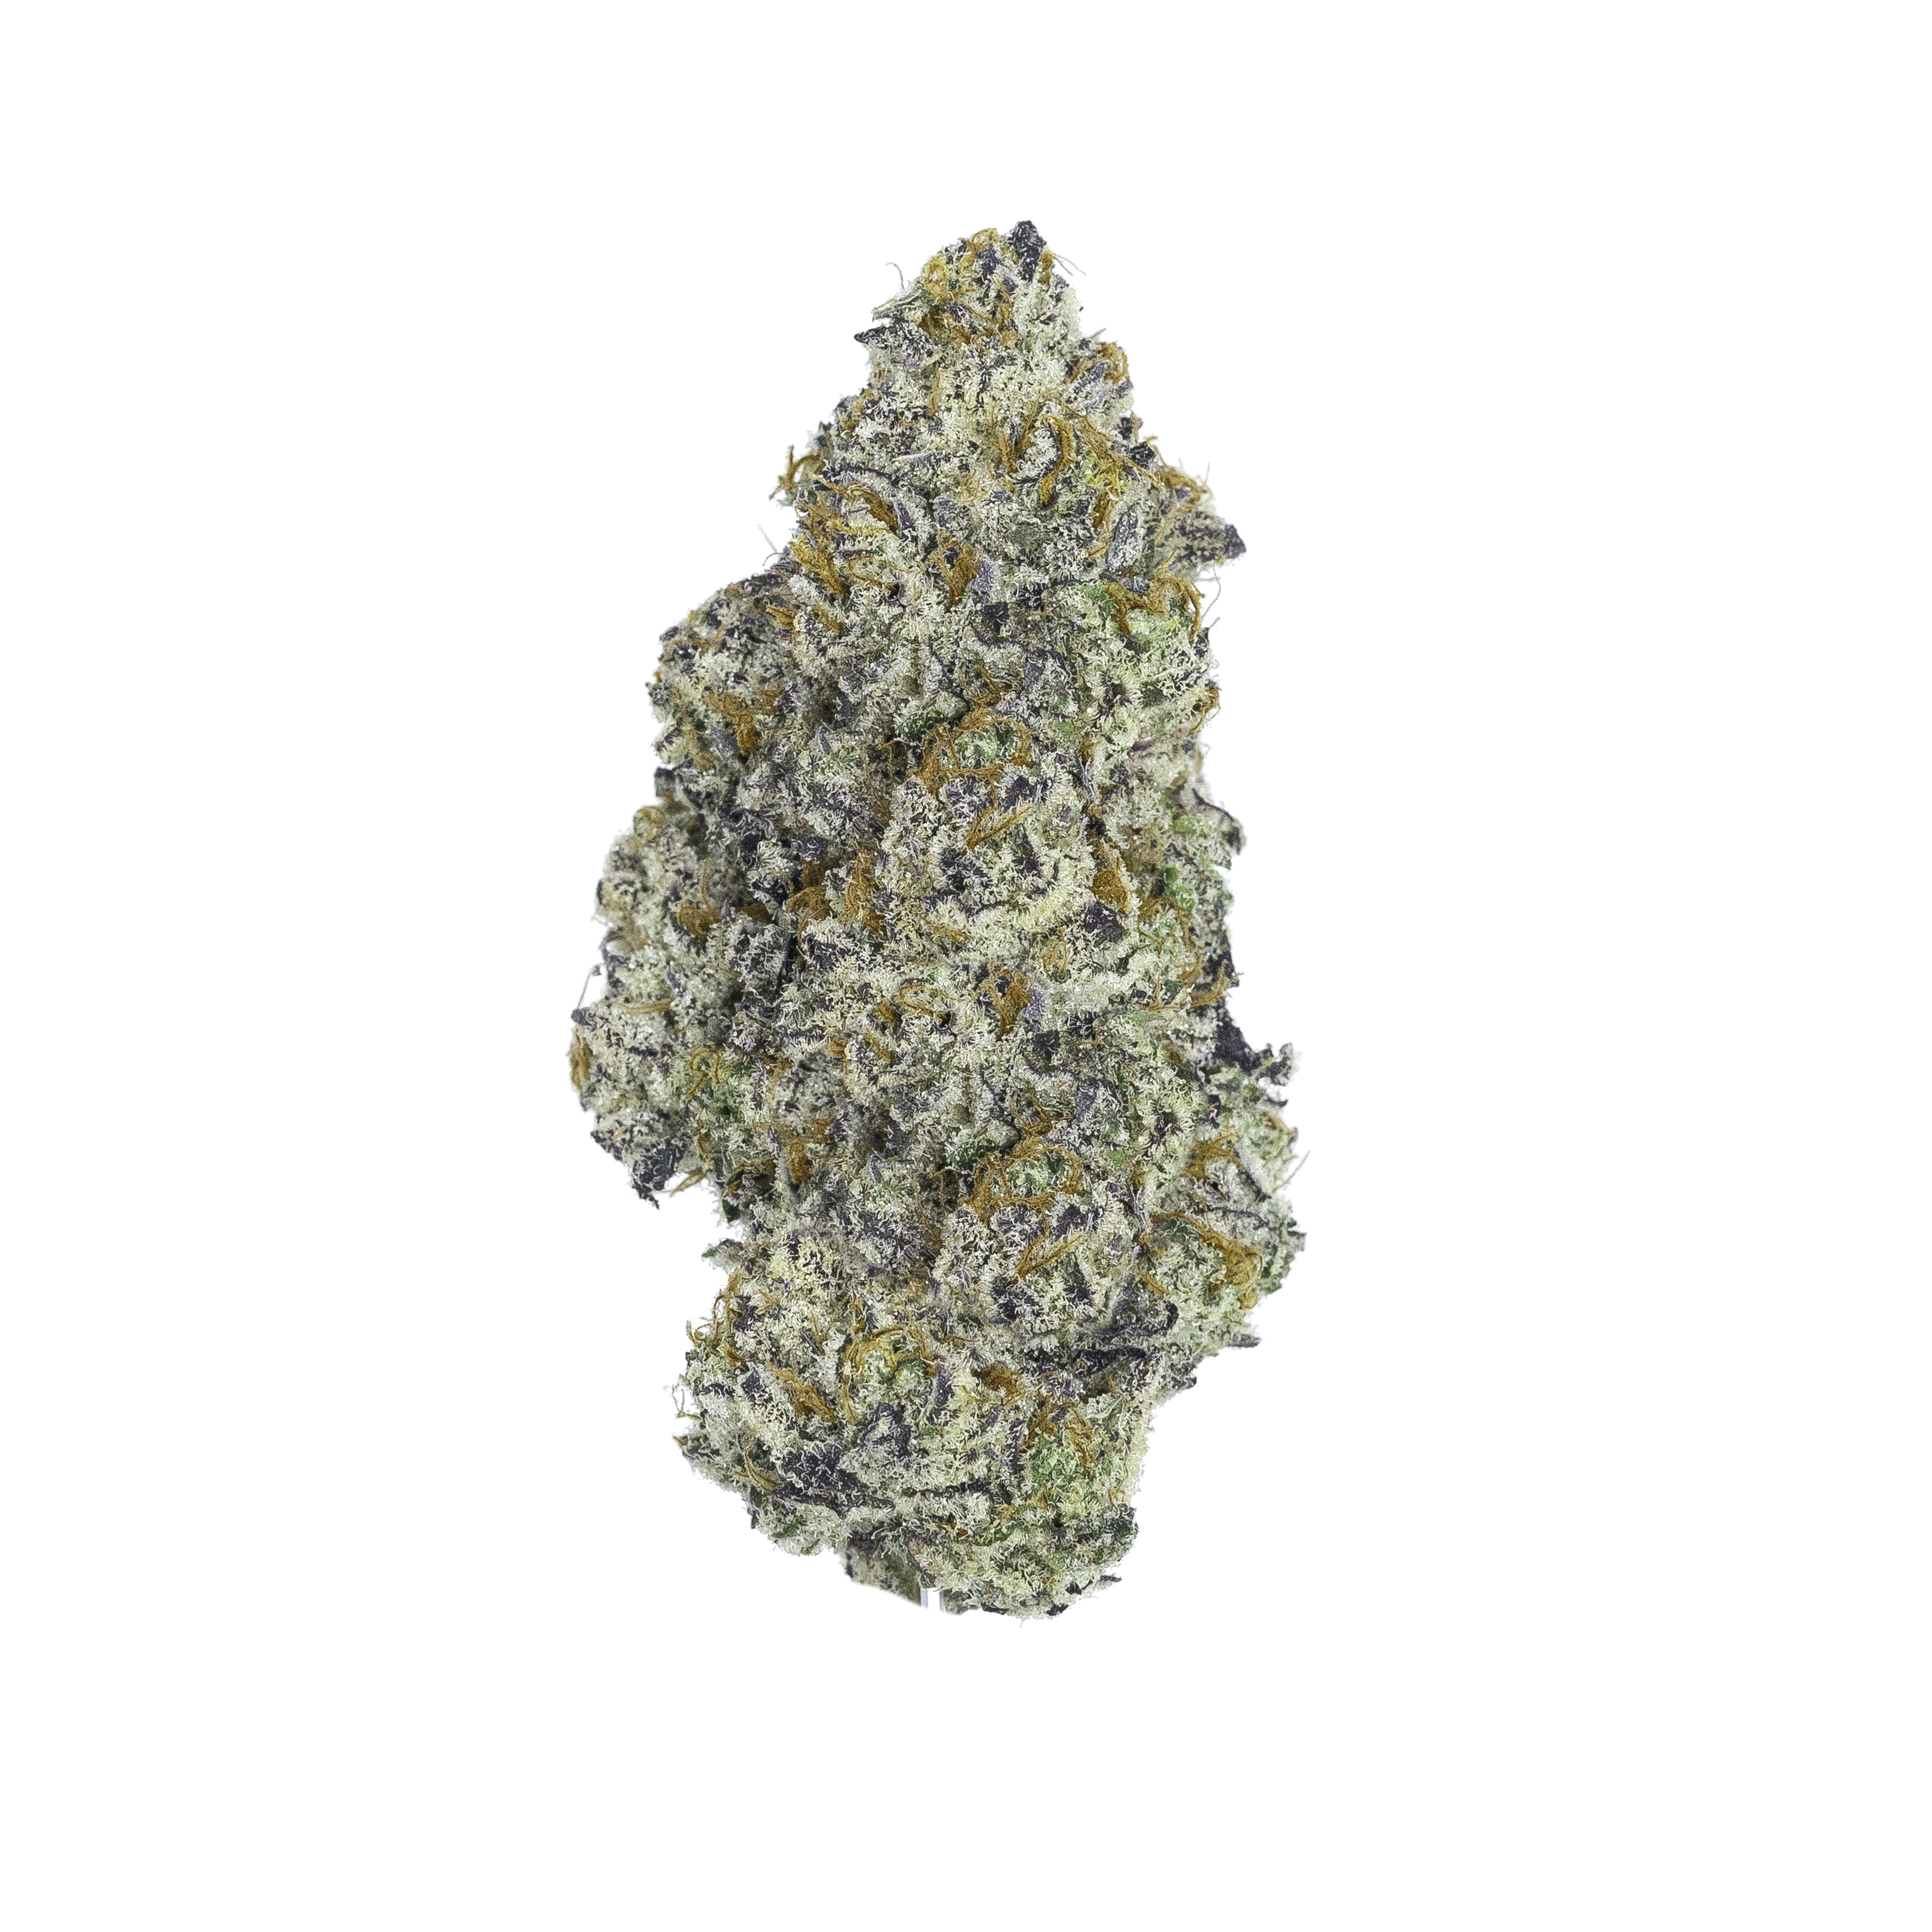 A cannabis flower nug from the blue razz slushie strain stands against a black background.